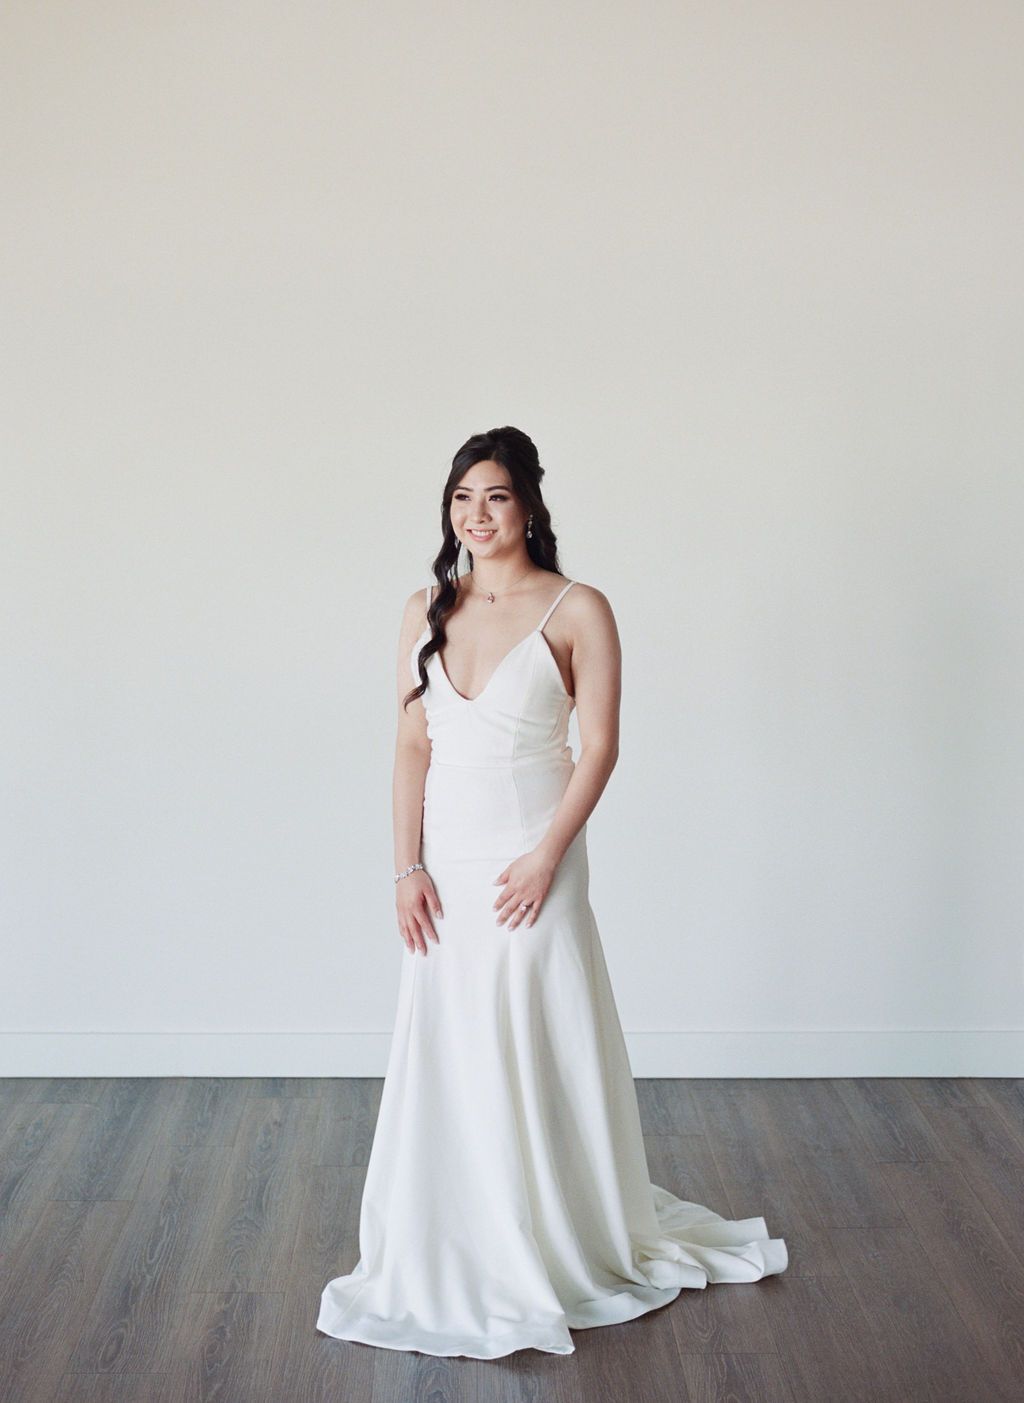 Modern Asian Wedding in Vancouver BC, Bridal Hair & Makeup: hairstyle inspiration for the bride, half up half down with hairpiece